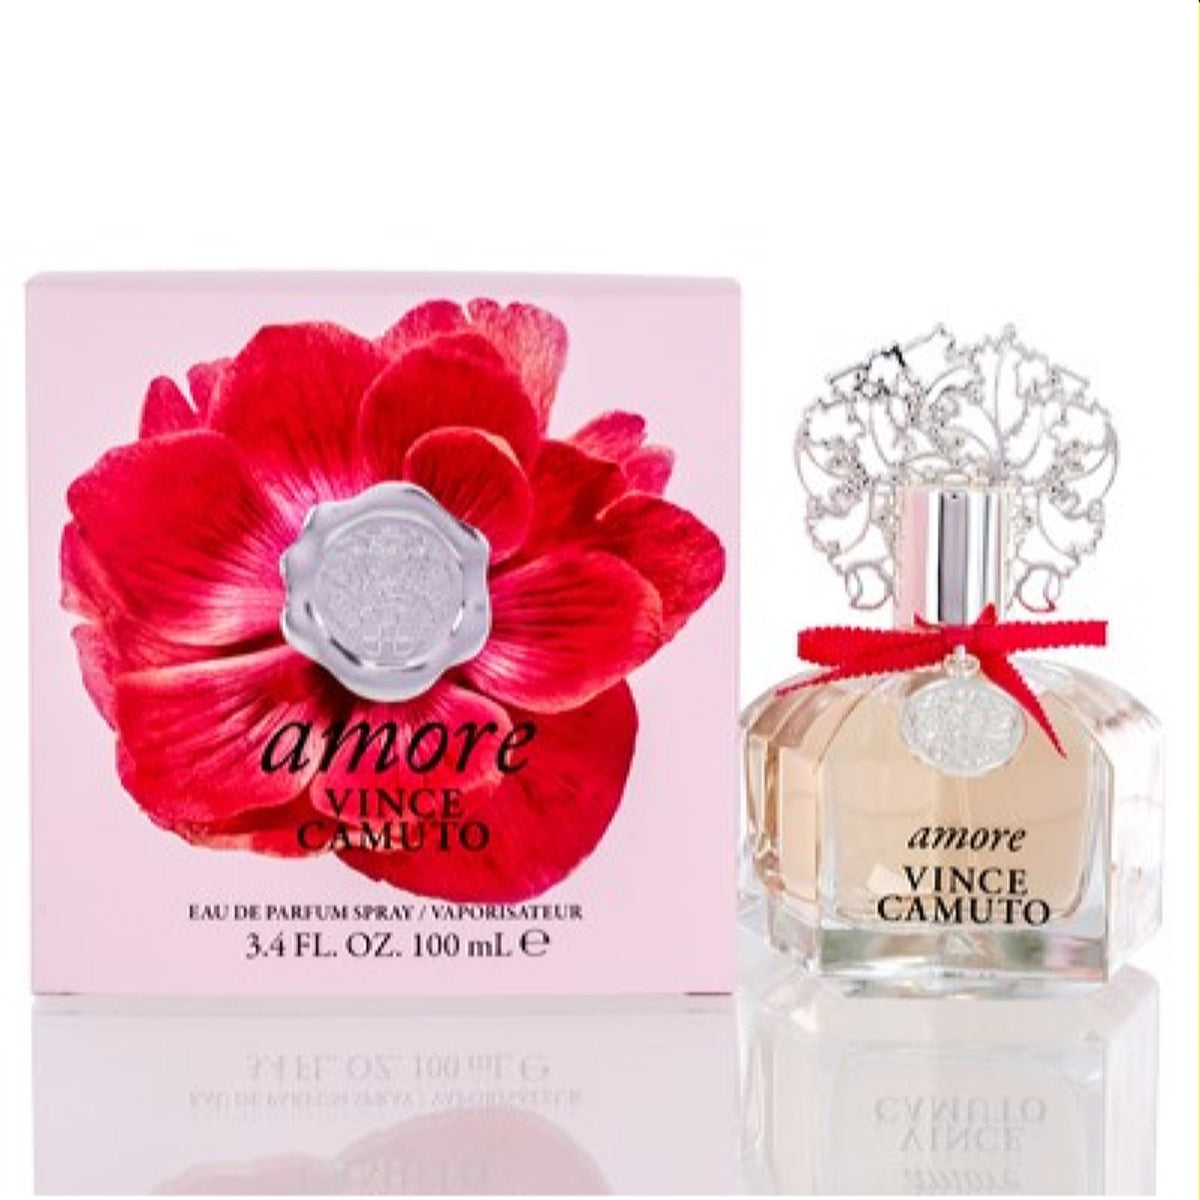 Amore Vince Camuto Vince Camuto Edp Spray 3.4 Oz (100 Ml) For Women  215667576